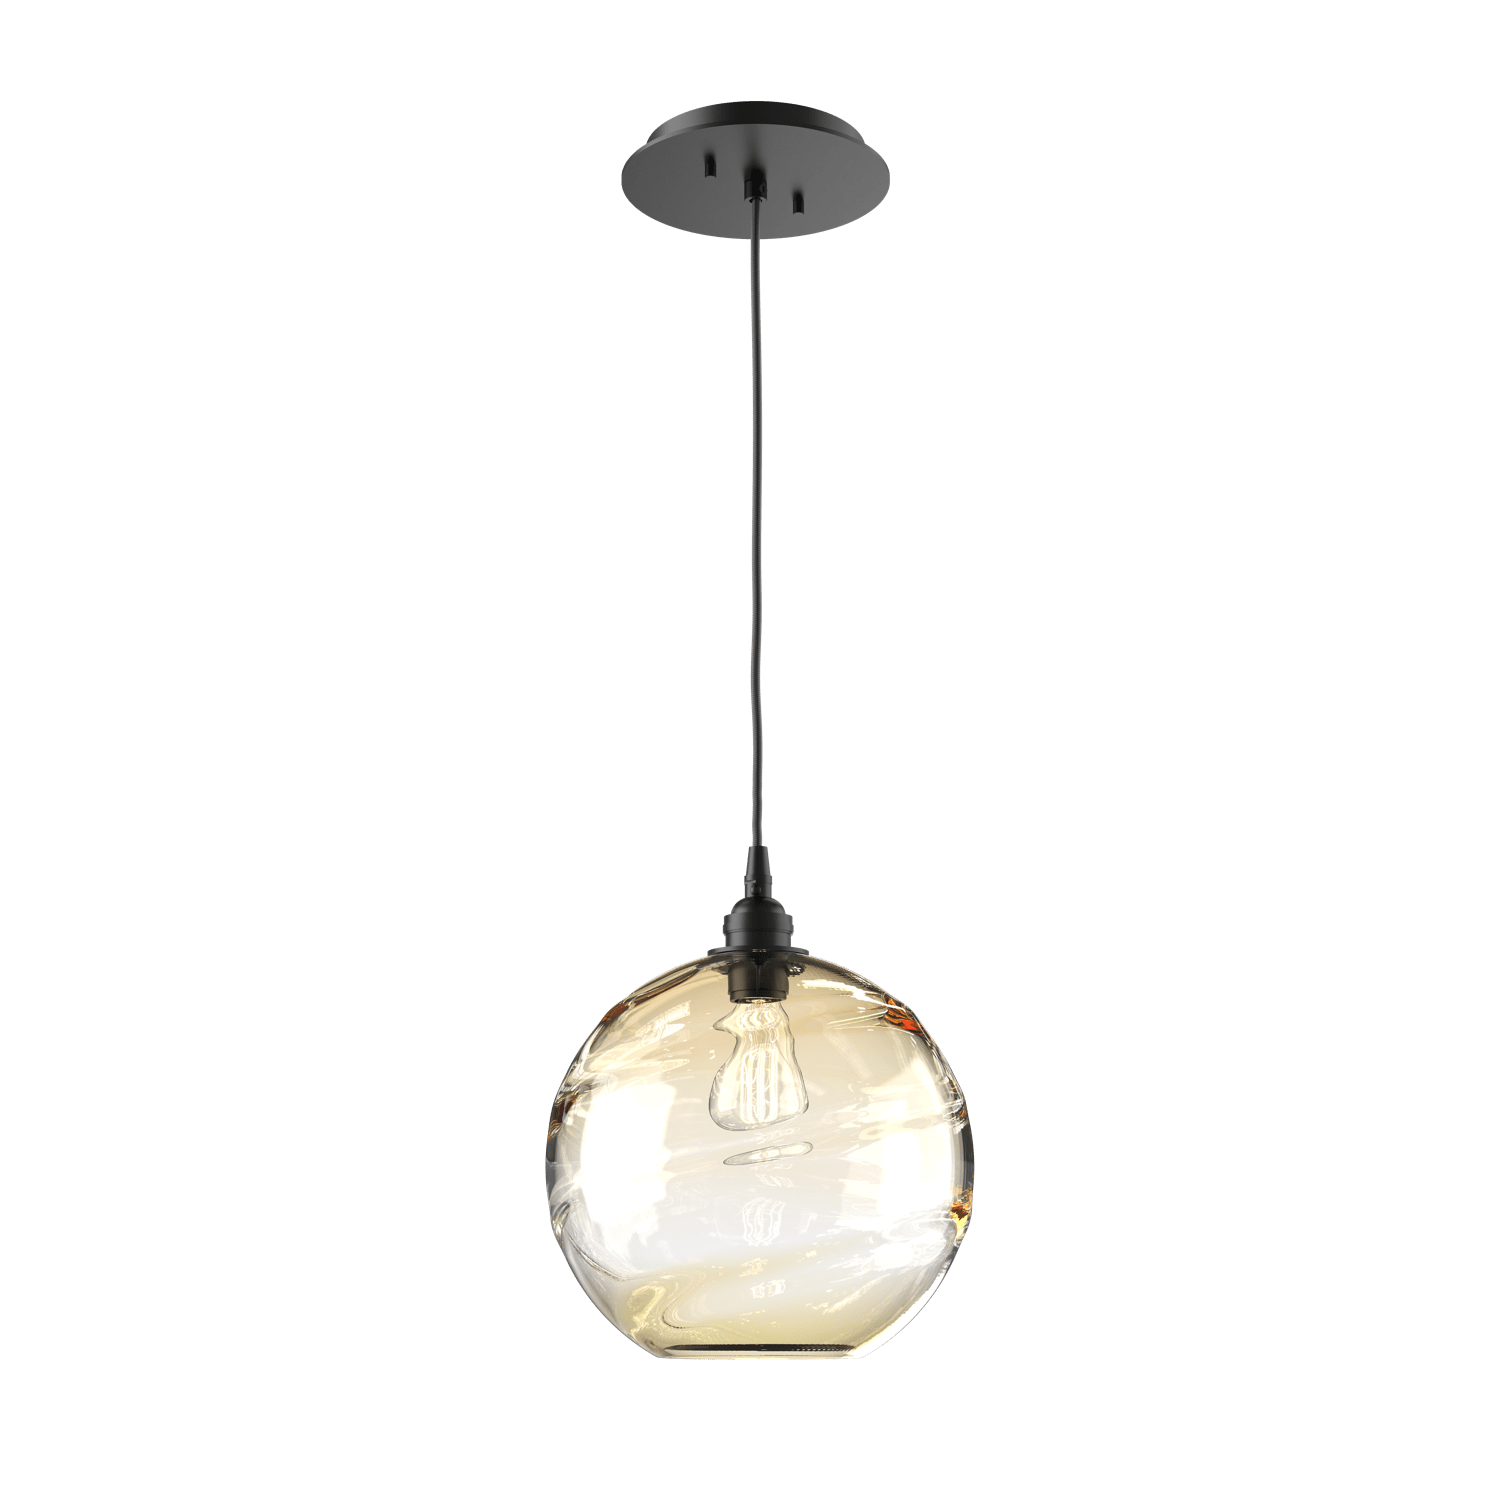 LAB0047-01-MB-OA-Hammerton-Studio-Optic-Blown-Glass-Terra-pendant-light-with-matte-black-finish-and-optic-amber-blown-glass-shades-and-incandescent-lamping